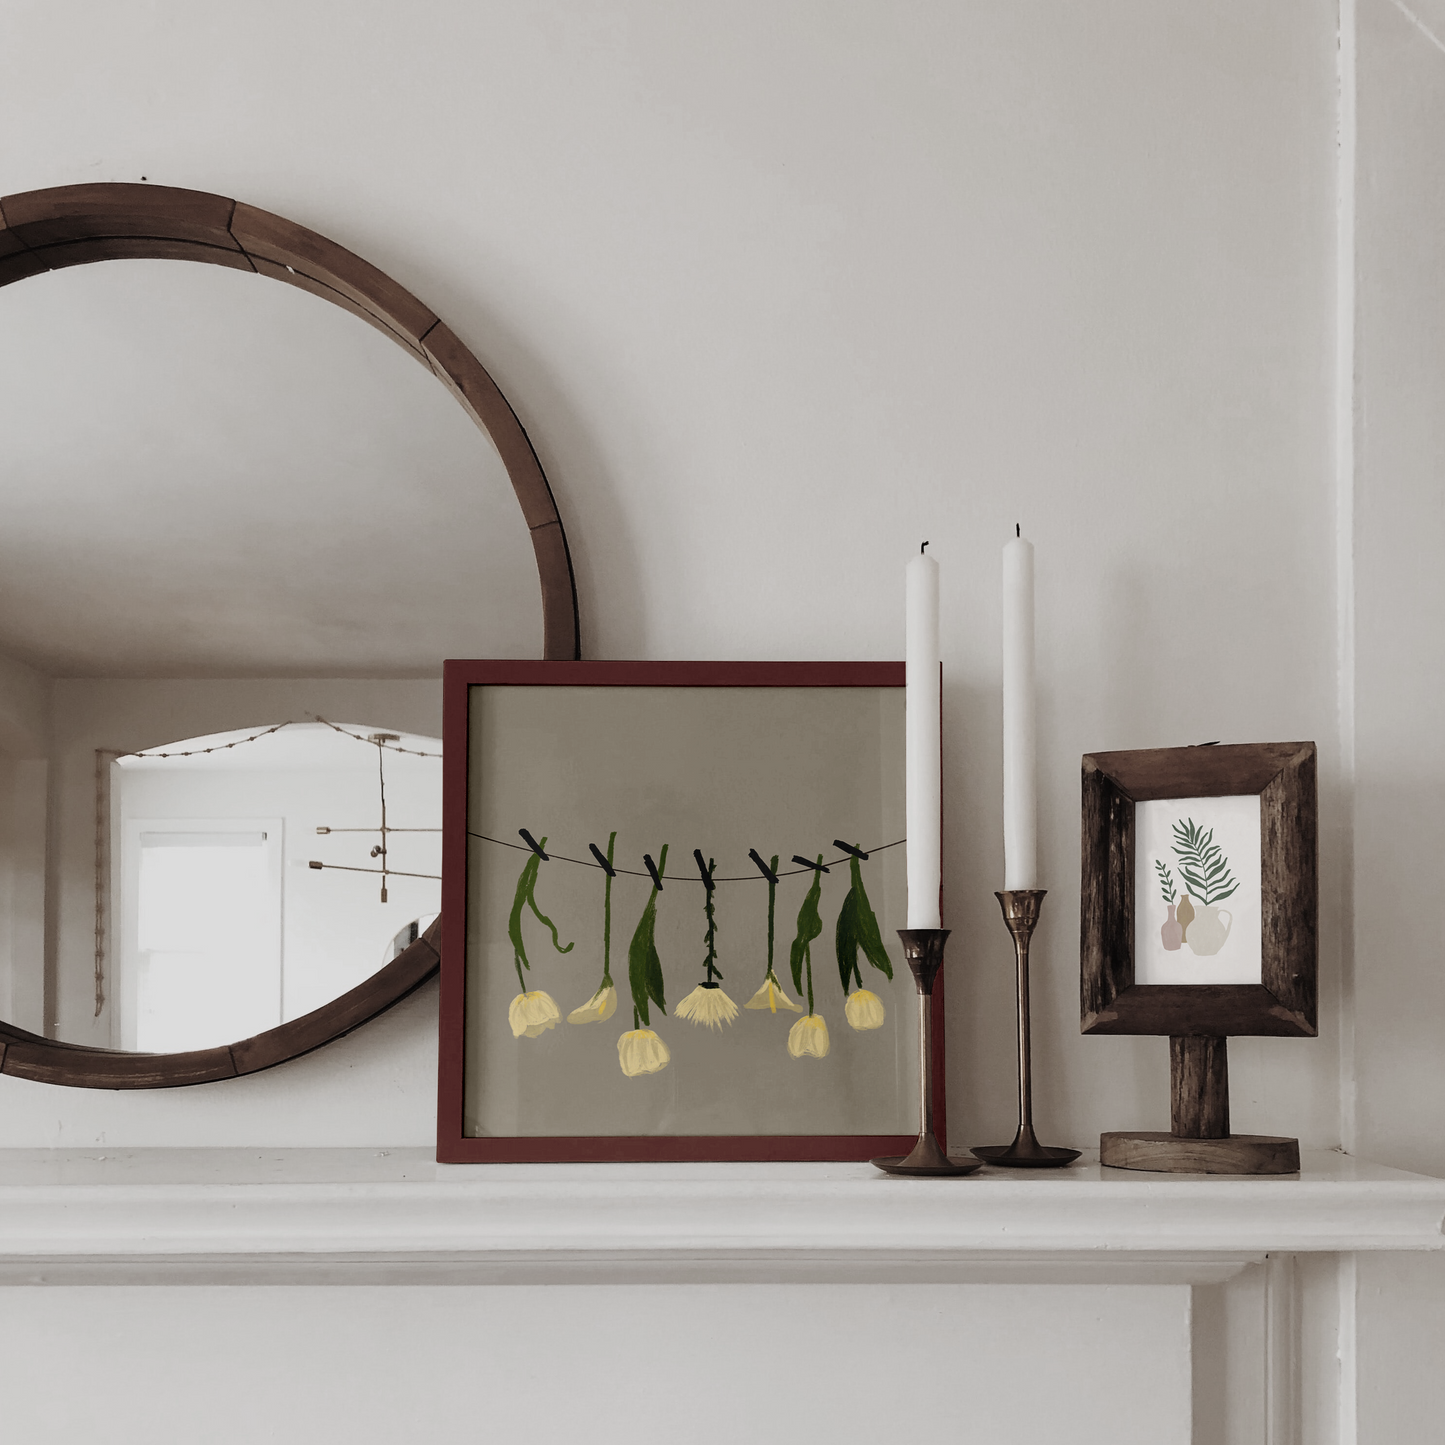 A rustic-chic digital painting of white flowers on a string, encased in a red-brown frame on a mantelpiece, creating a charming vintage feel with candles and a wooden mirror.